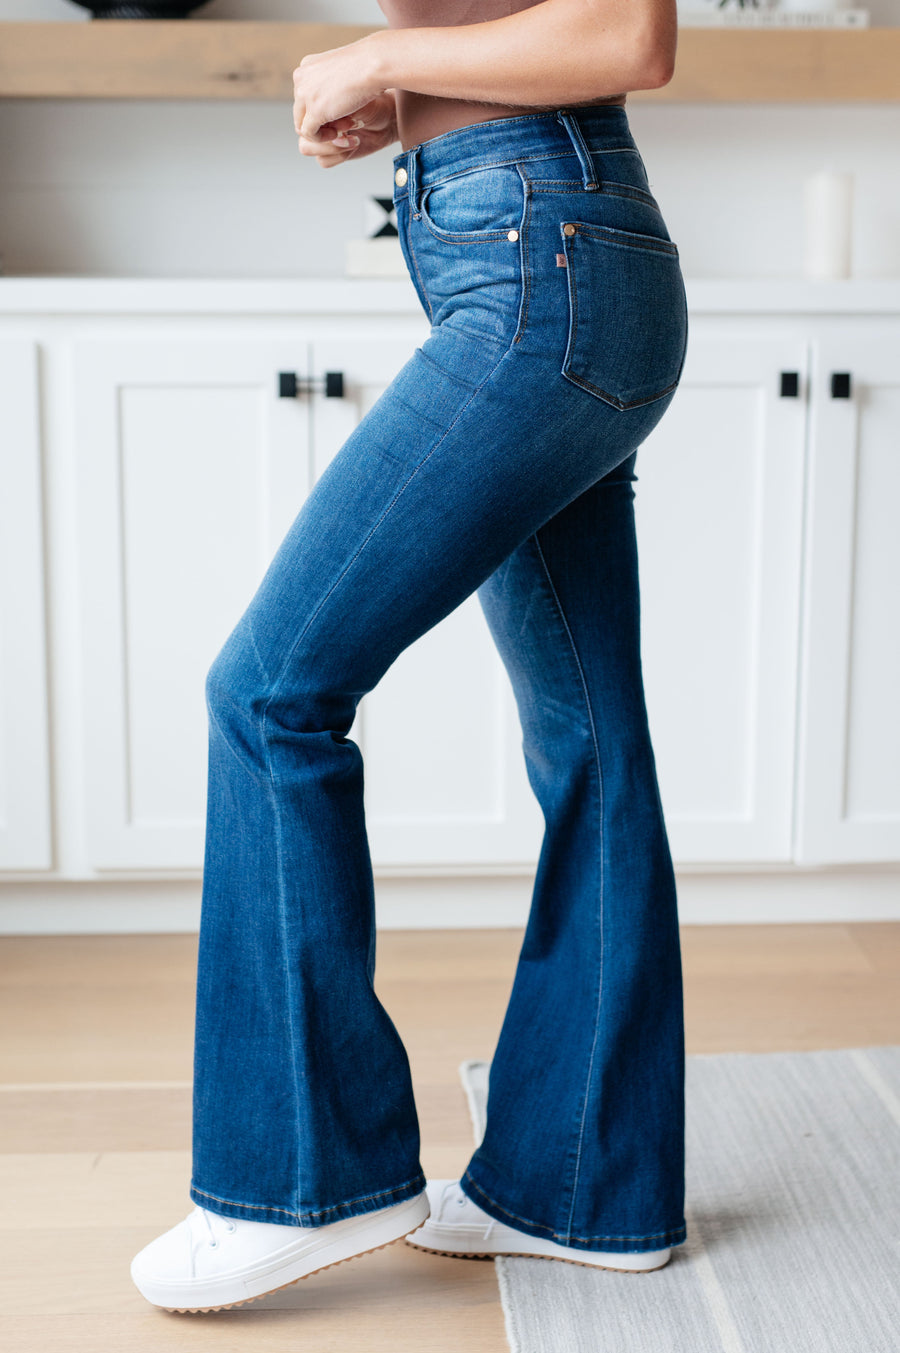 Judy Blue Classic Flare Jeans